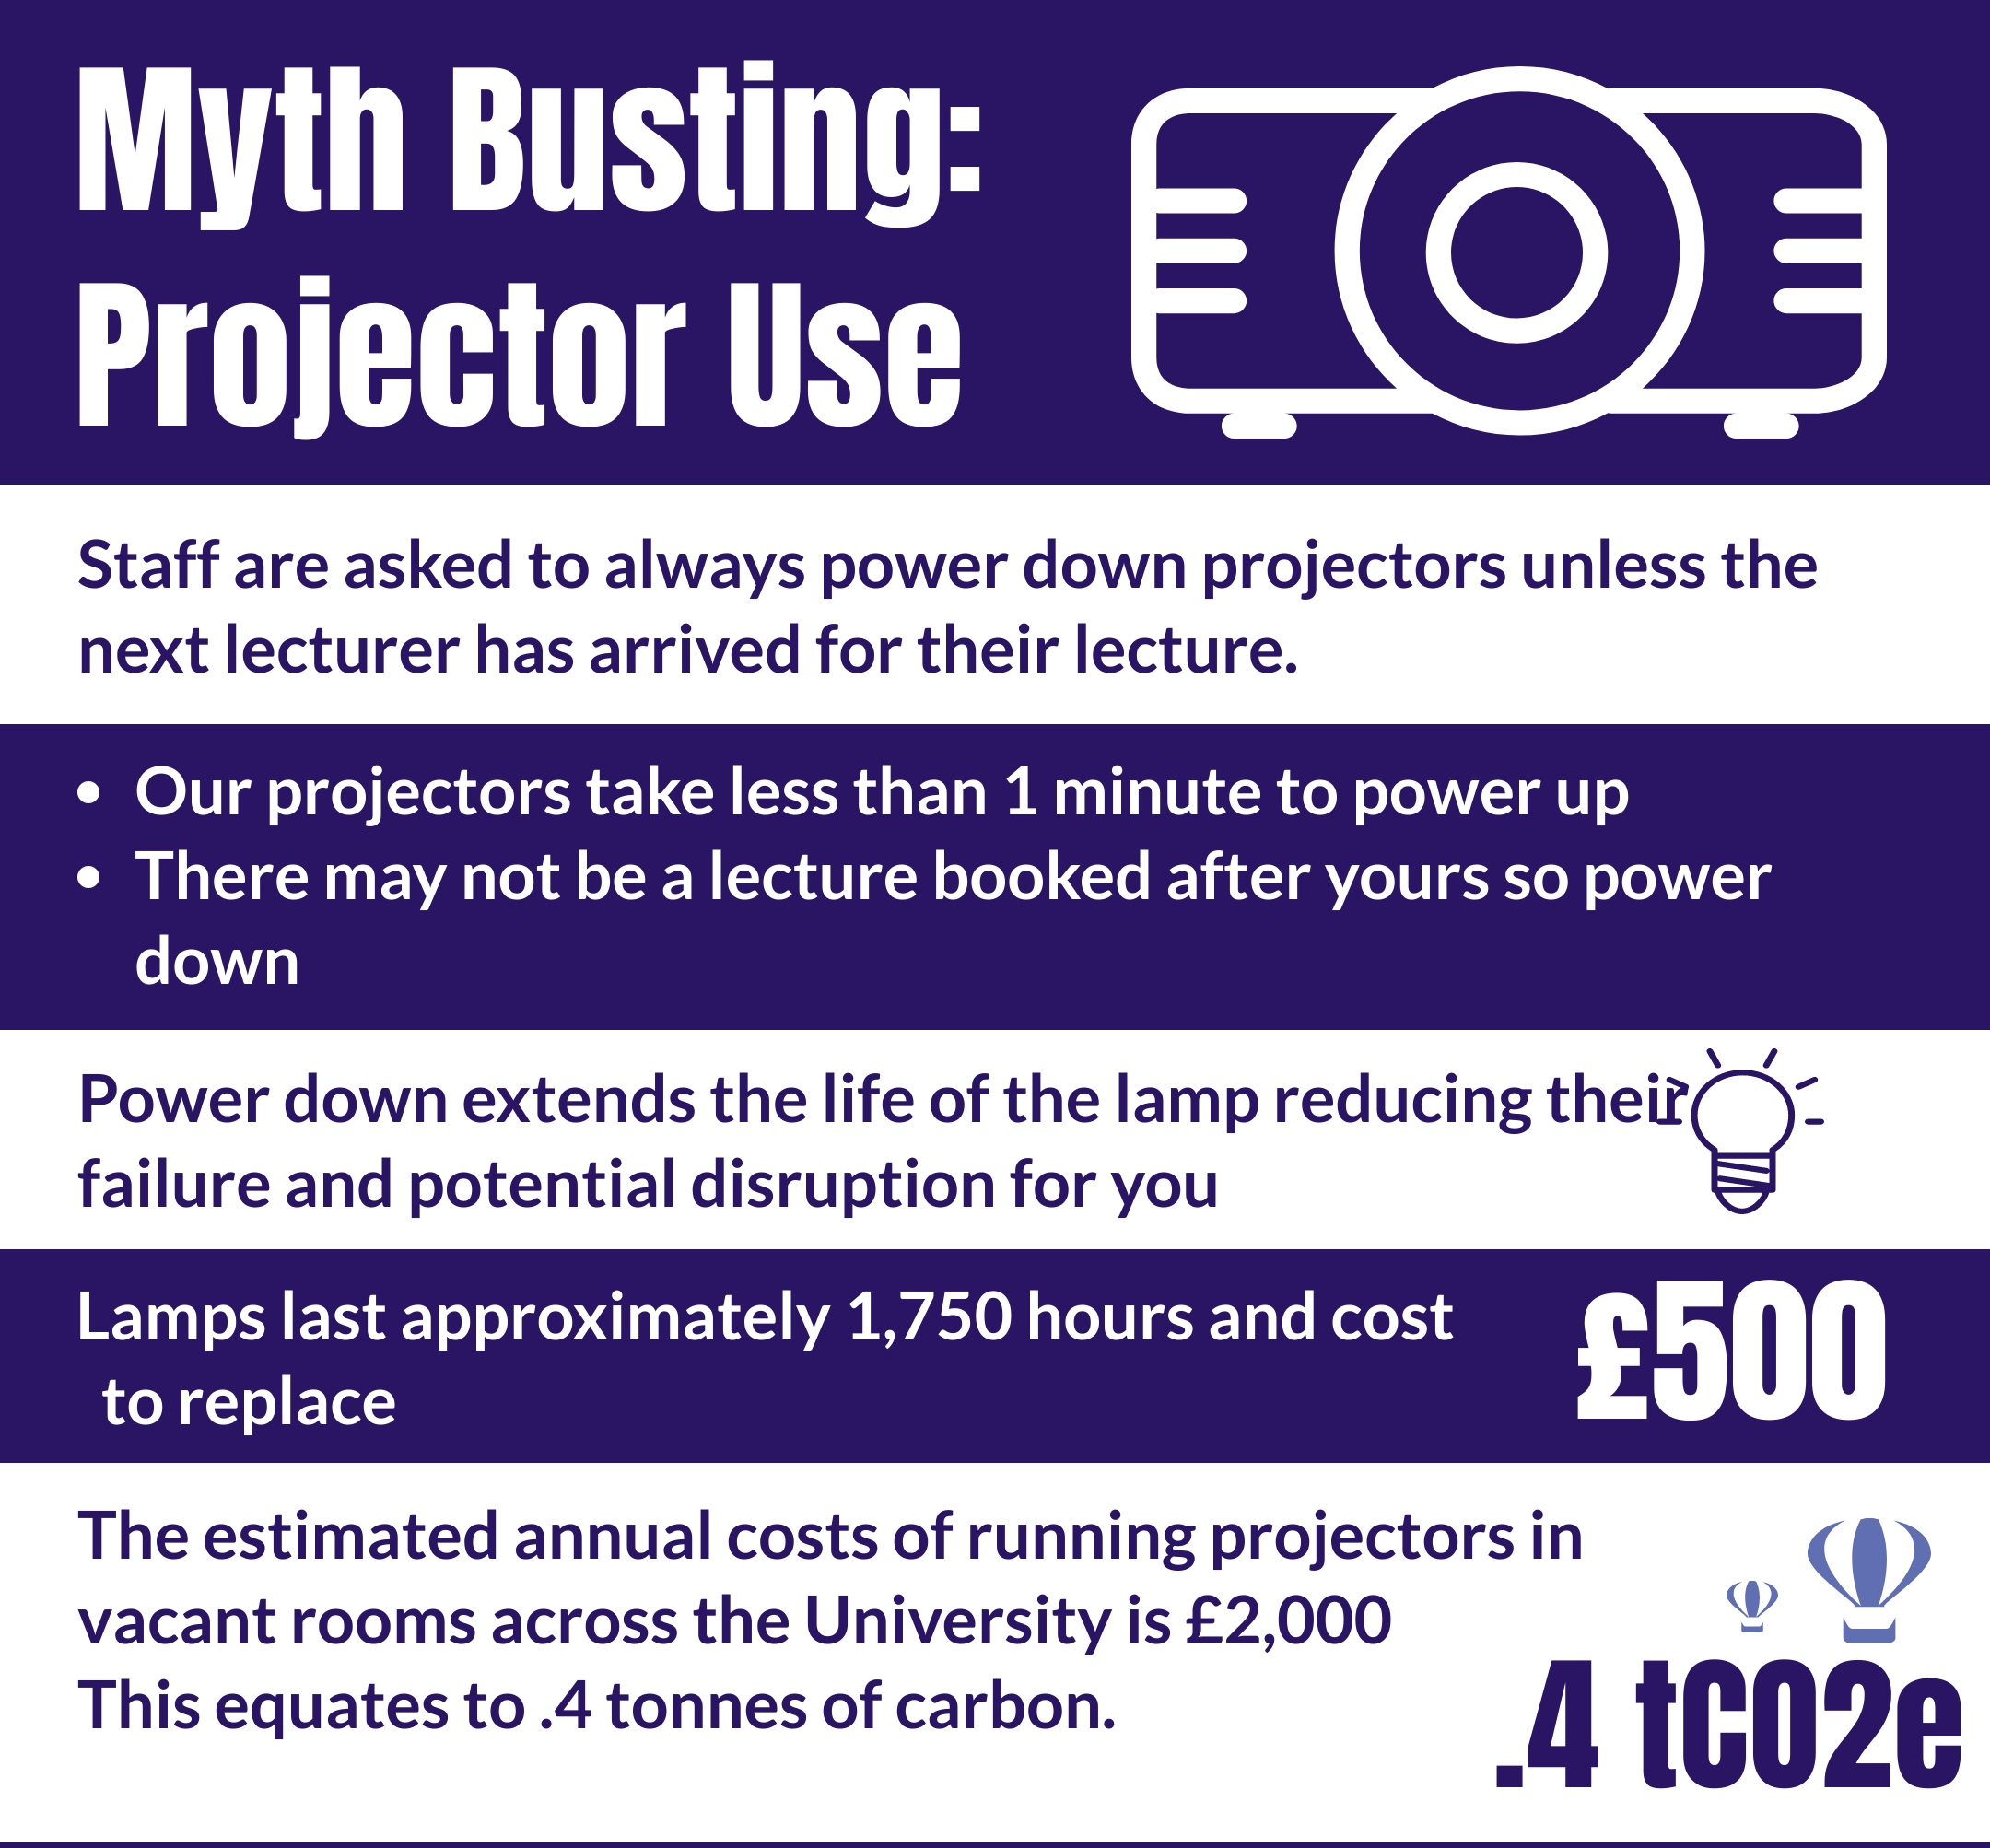 Myth Busting: Projector Use. Staff are asked to always power down projectors unless the next lecturer has arrived for their lecture. Our projectors take less than 1 minute to power up. There may not be a lecture booked after yours so power down. Power down extends the life of the lamp reducing their failure and potential disruption for you. Lamps last approximately 1750 hours and cost £500 to replace. The estimated annual cost of running projectors in vacant rooms across the university is £2,000. This equates to 0.4 tonnes of carbon.